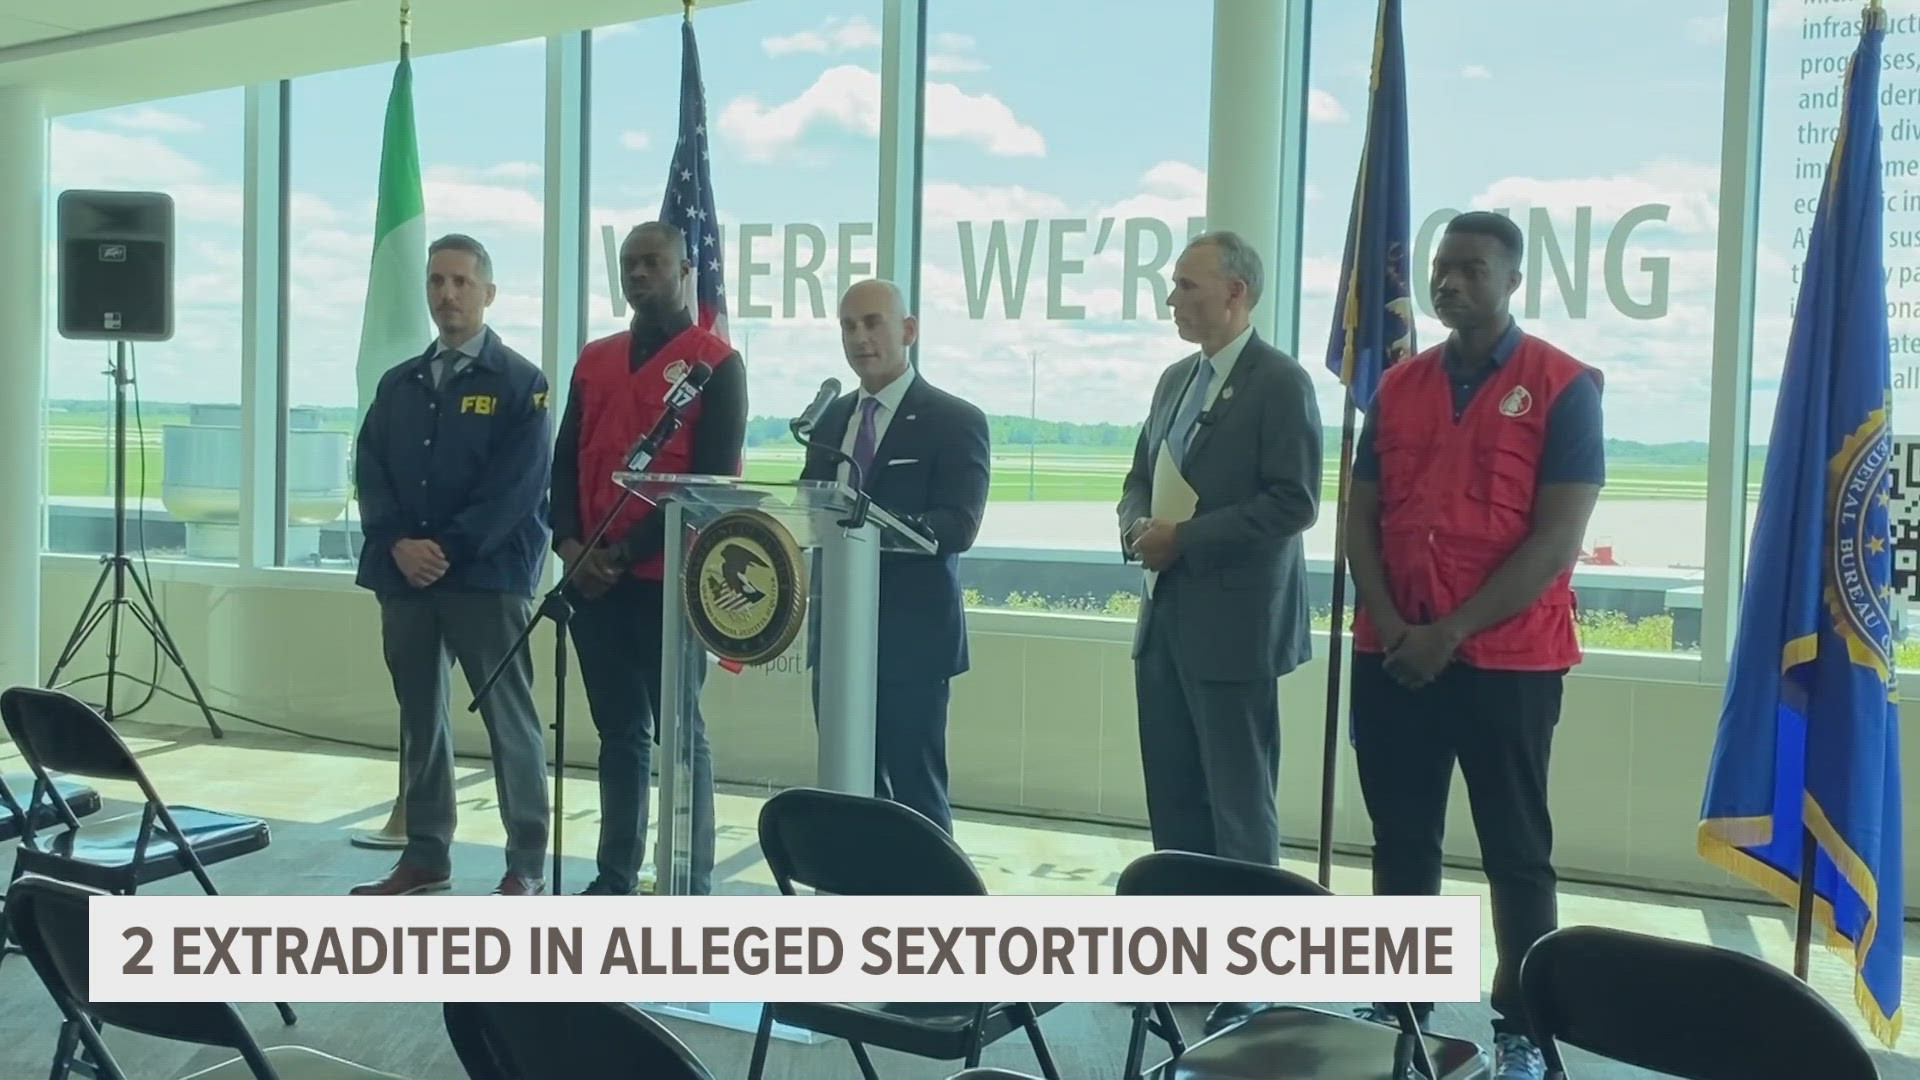 Three men from Nigeria were charged with sexually extorting Jordan DeMay and numerous other young men and teenage boys in West Michigan and across the United States.